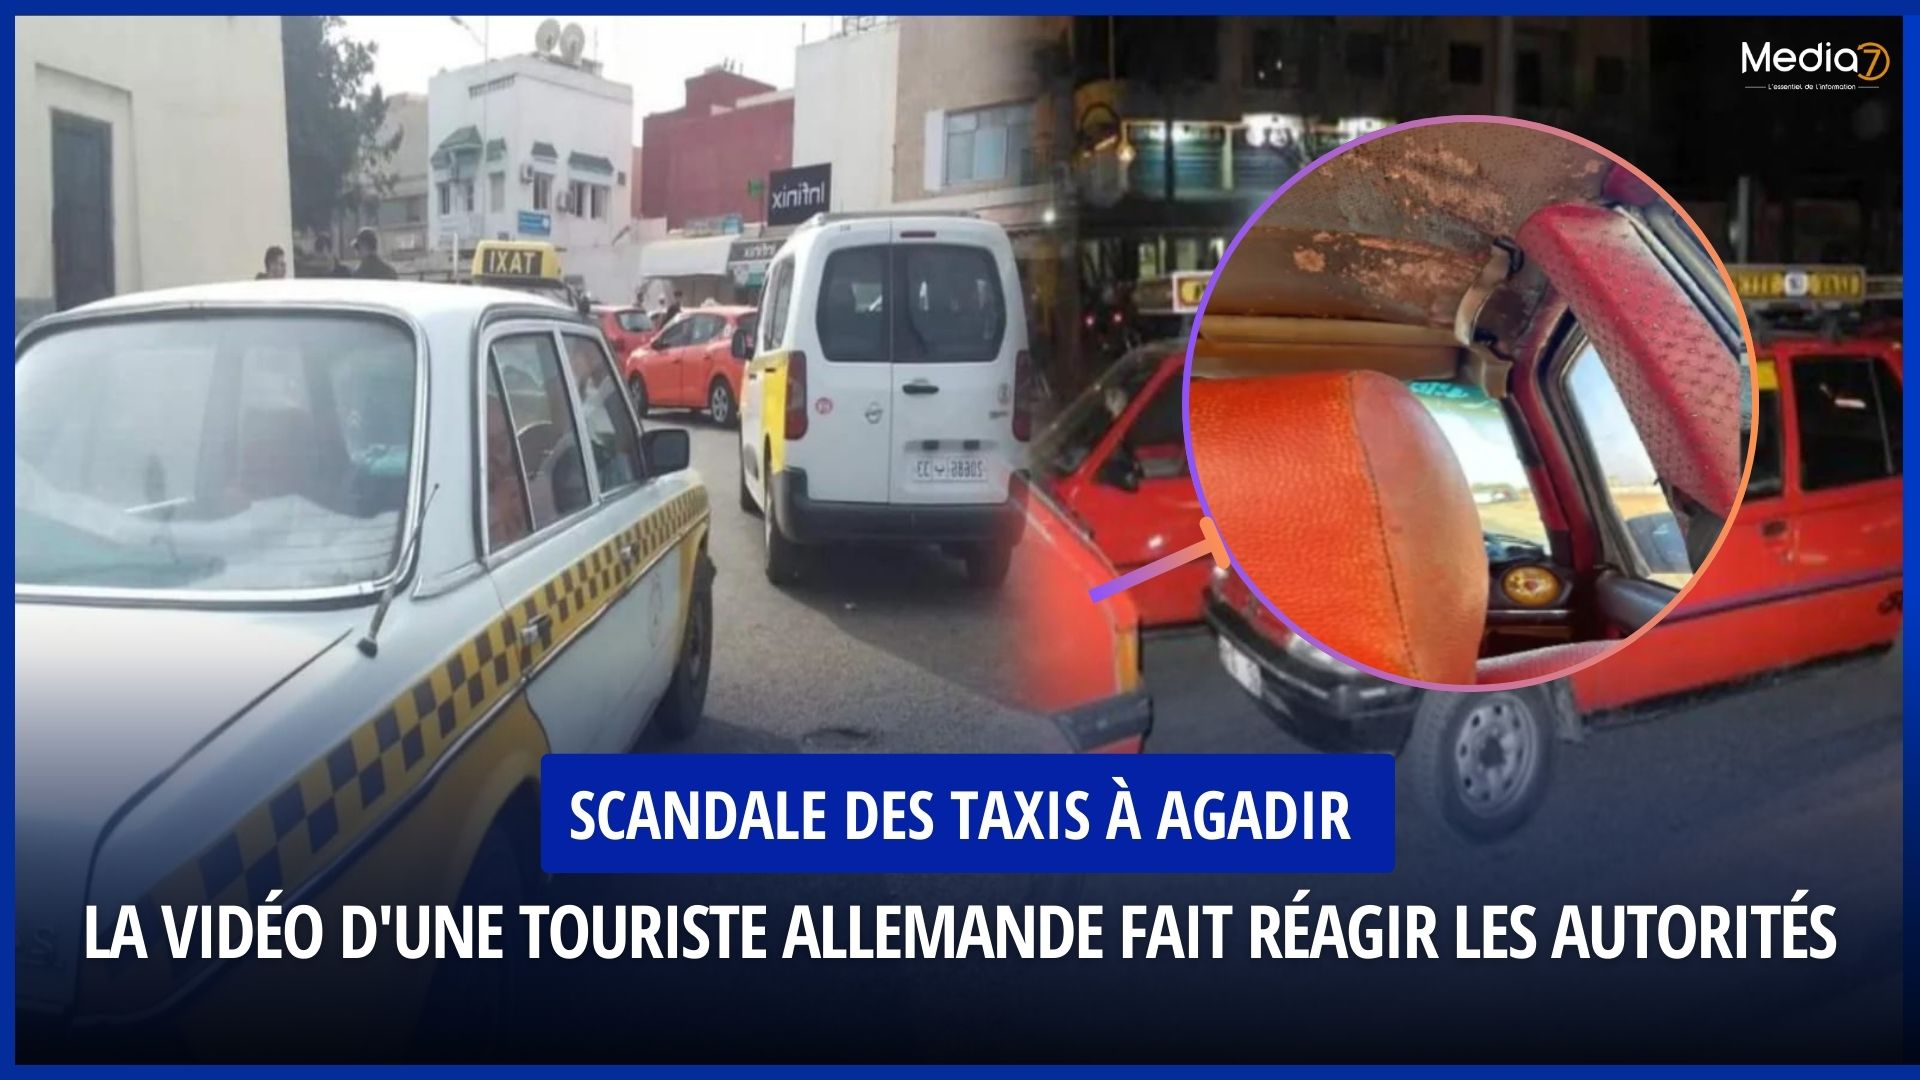 Taxi Scandal in Agadir: The Video of a German Tourist Makes the Authorities React